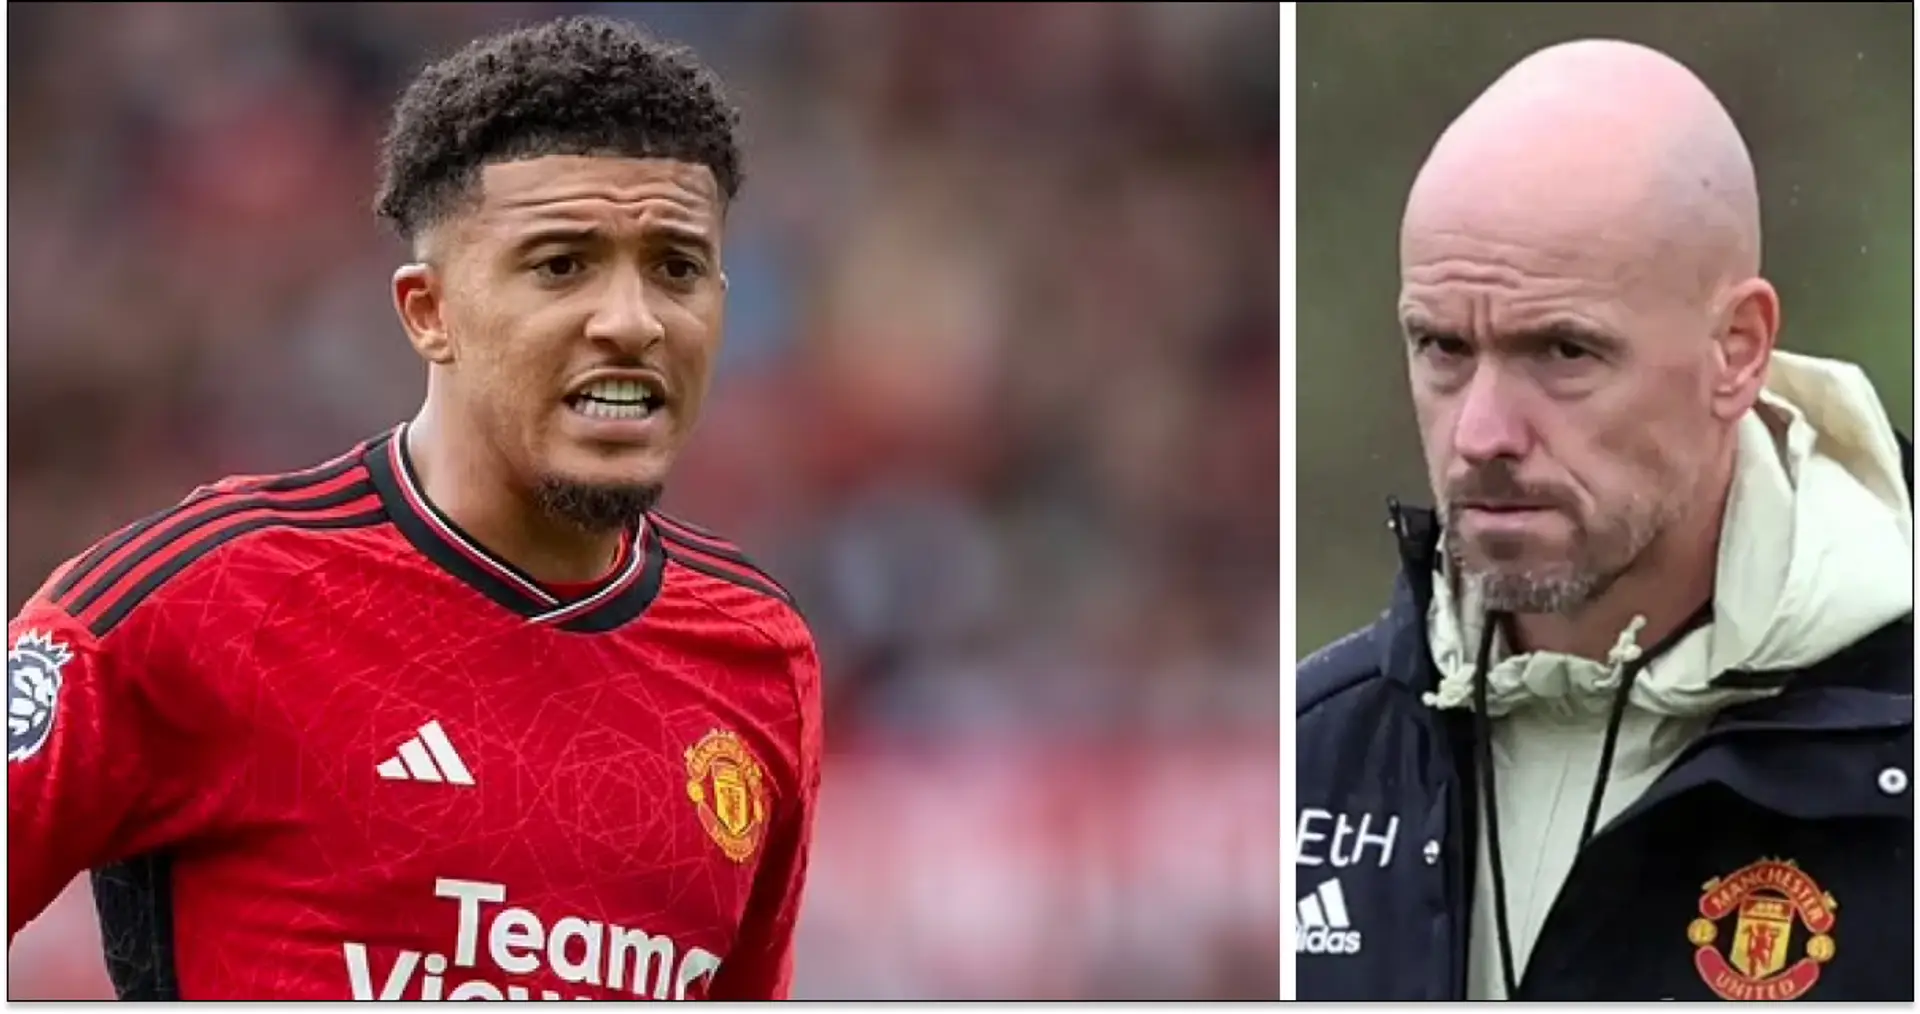 Giggs explains Ten Hag's thinking behind Sancho criticism: 'Last attempt to get best out of him'